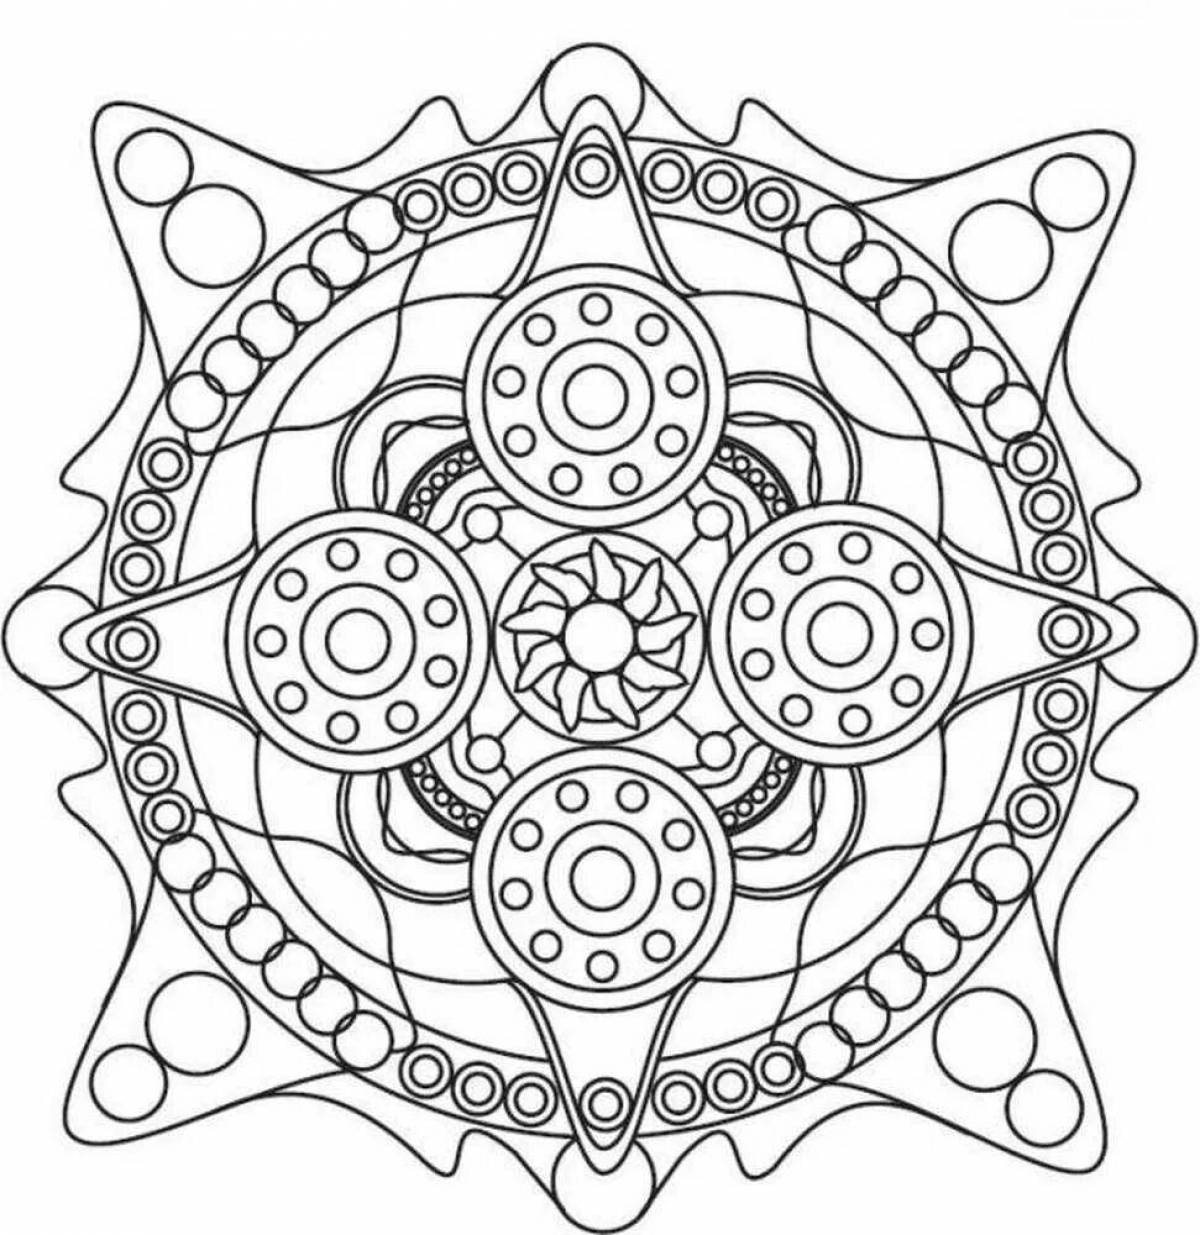 Glamor coloring mandala for good luck and success